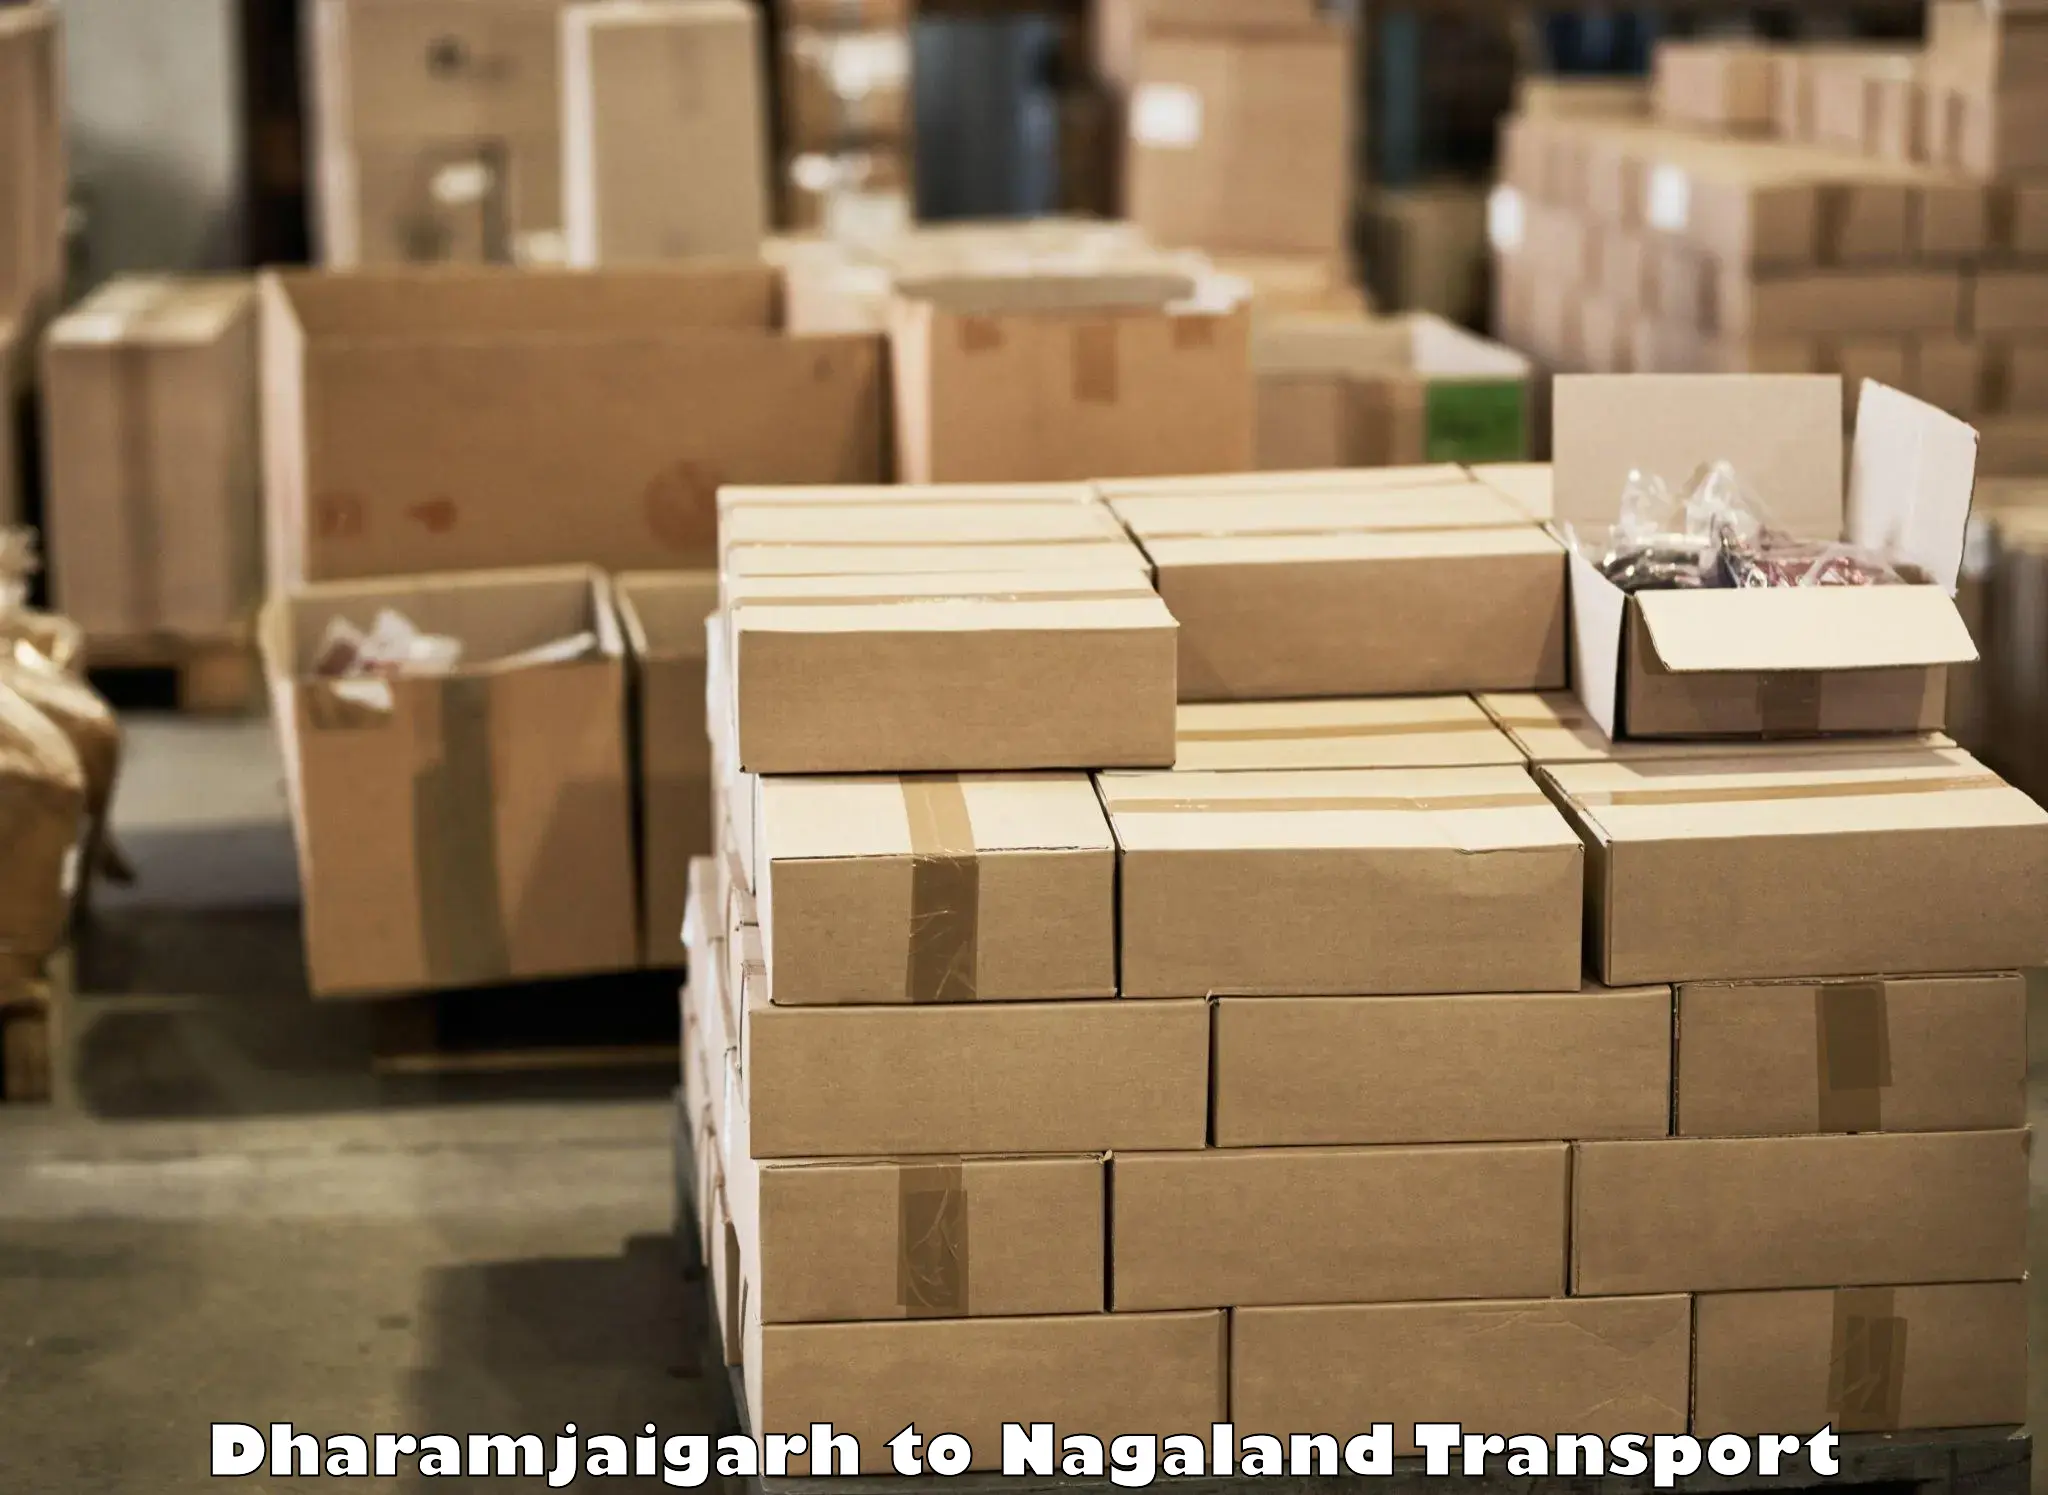 Parcel transport services Dharamjaigarh to Nagaland